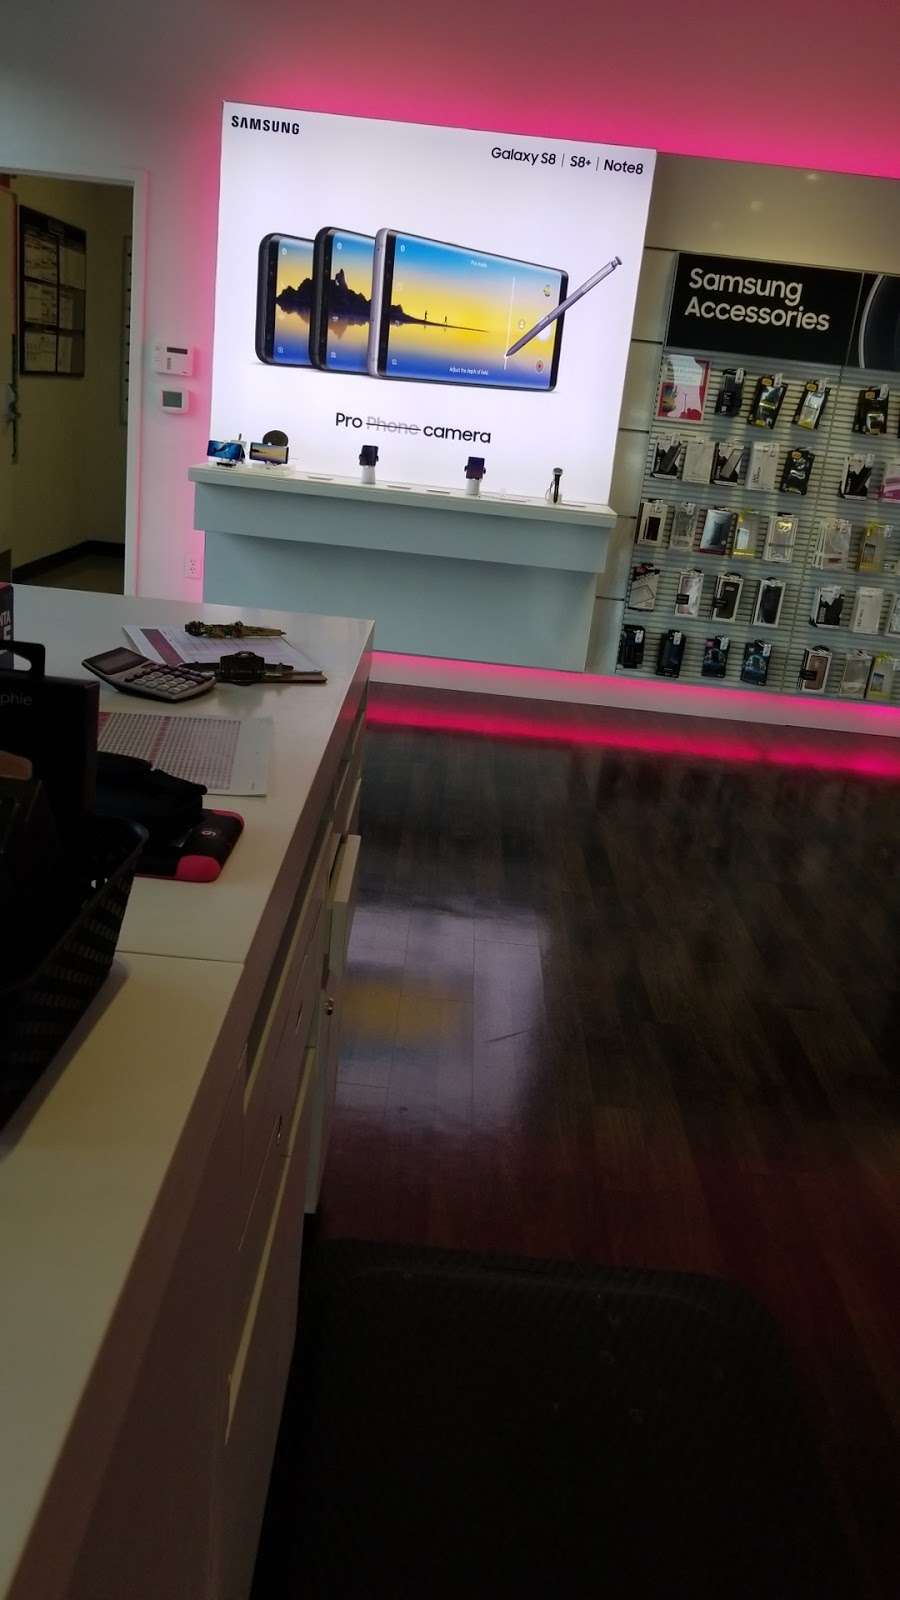 T-Mobile | 14755 N Fwy Service Rd, Houston, TX 77090, USA | Phone: (281) 377-5578